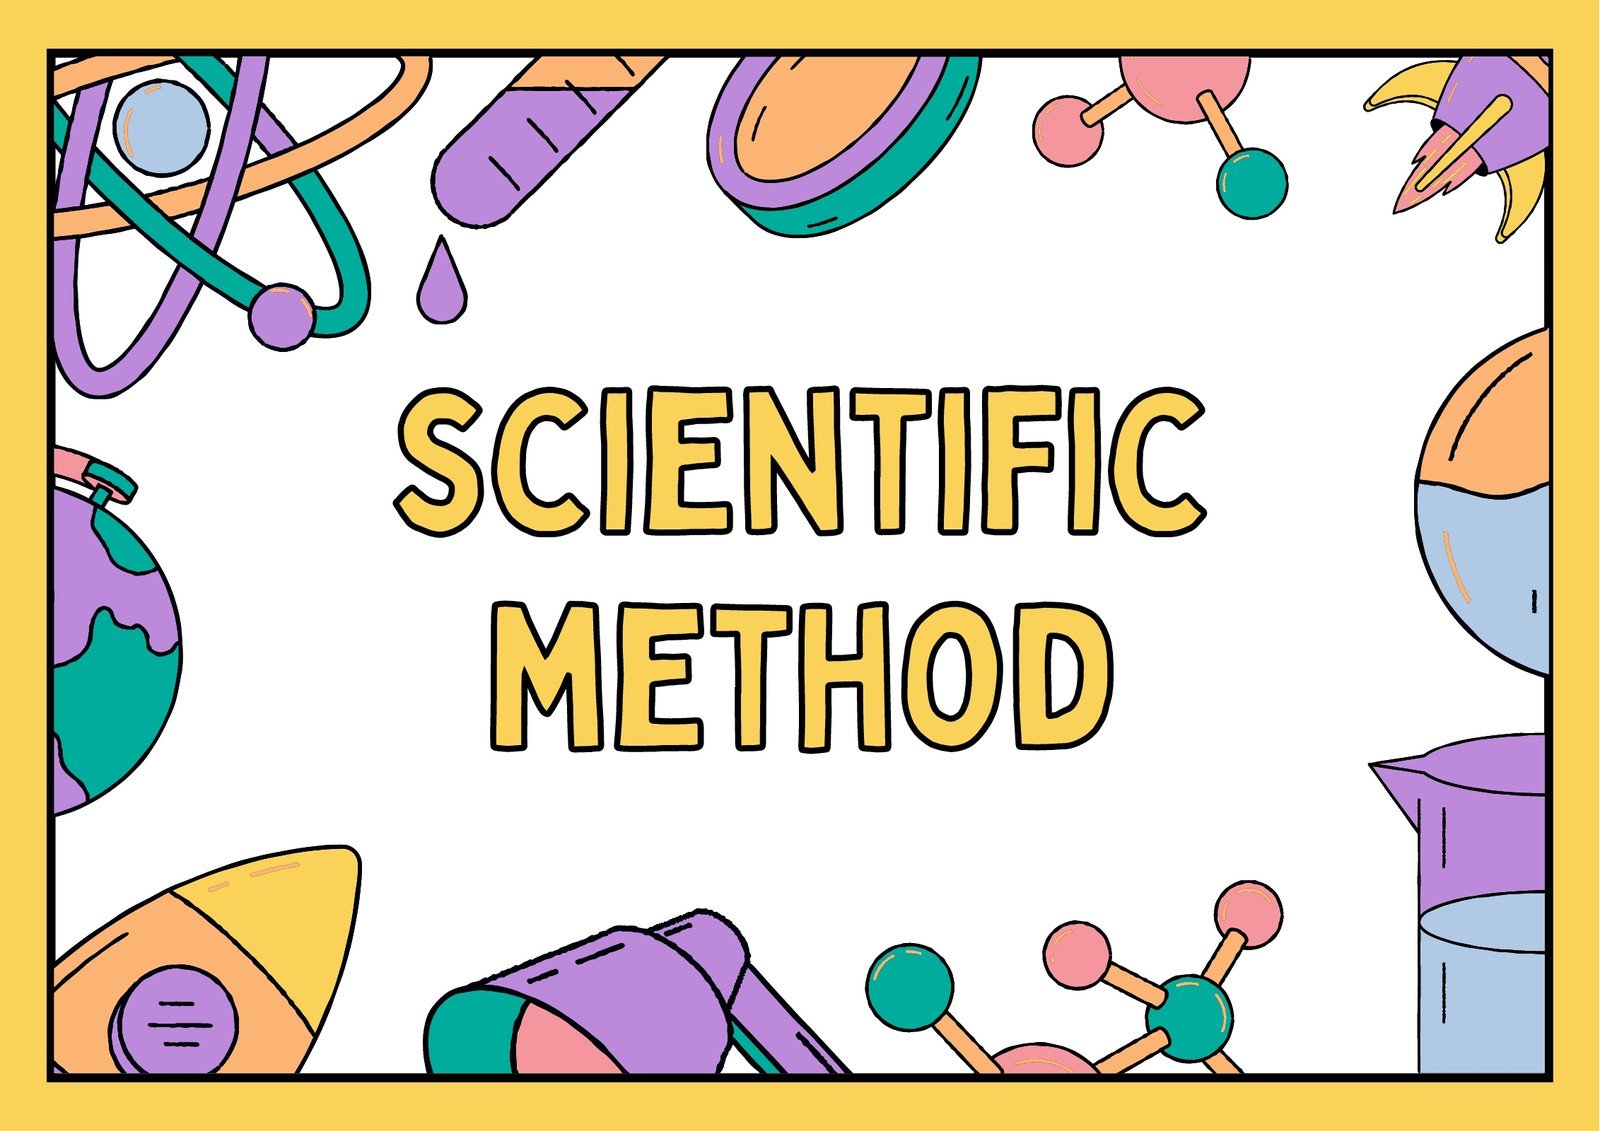 Scientific Method Science Posters Colourful Lined Illustrations